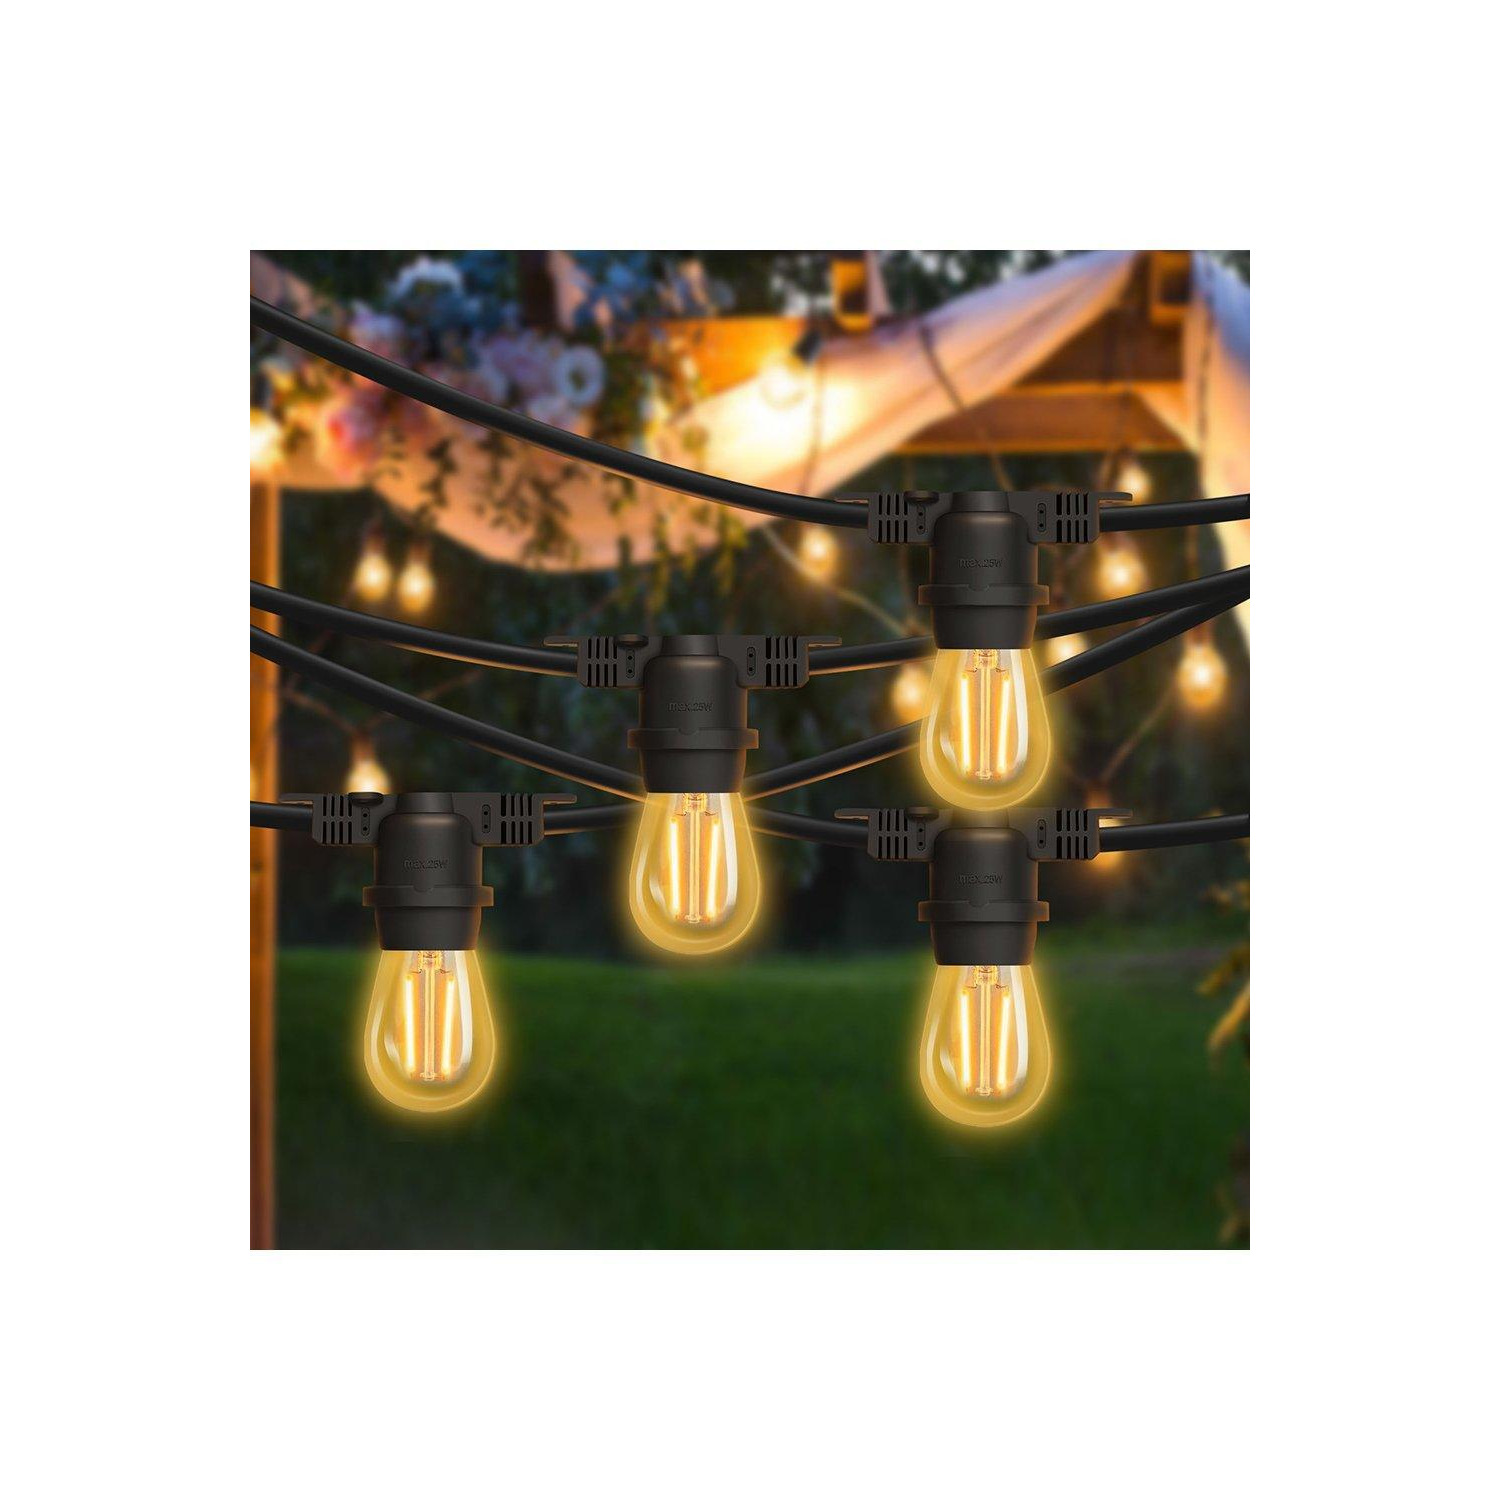 10M String Lights with 15 E27 Holder, IP65, connectable, Black - image 1